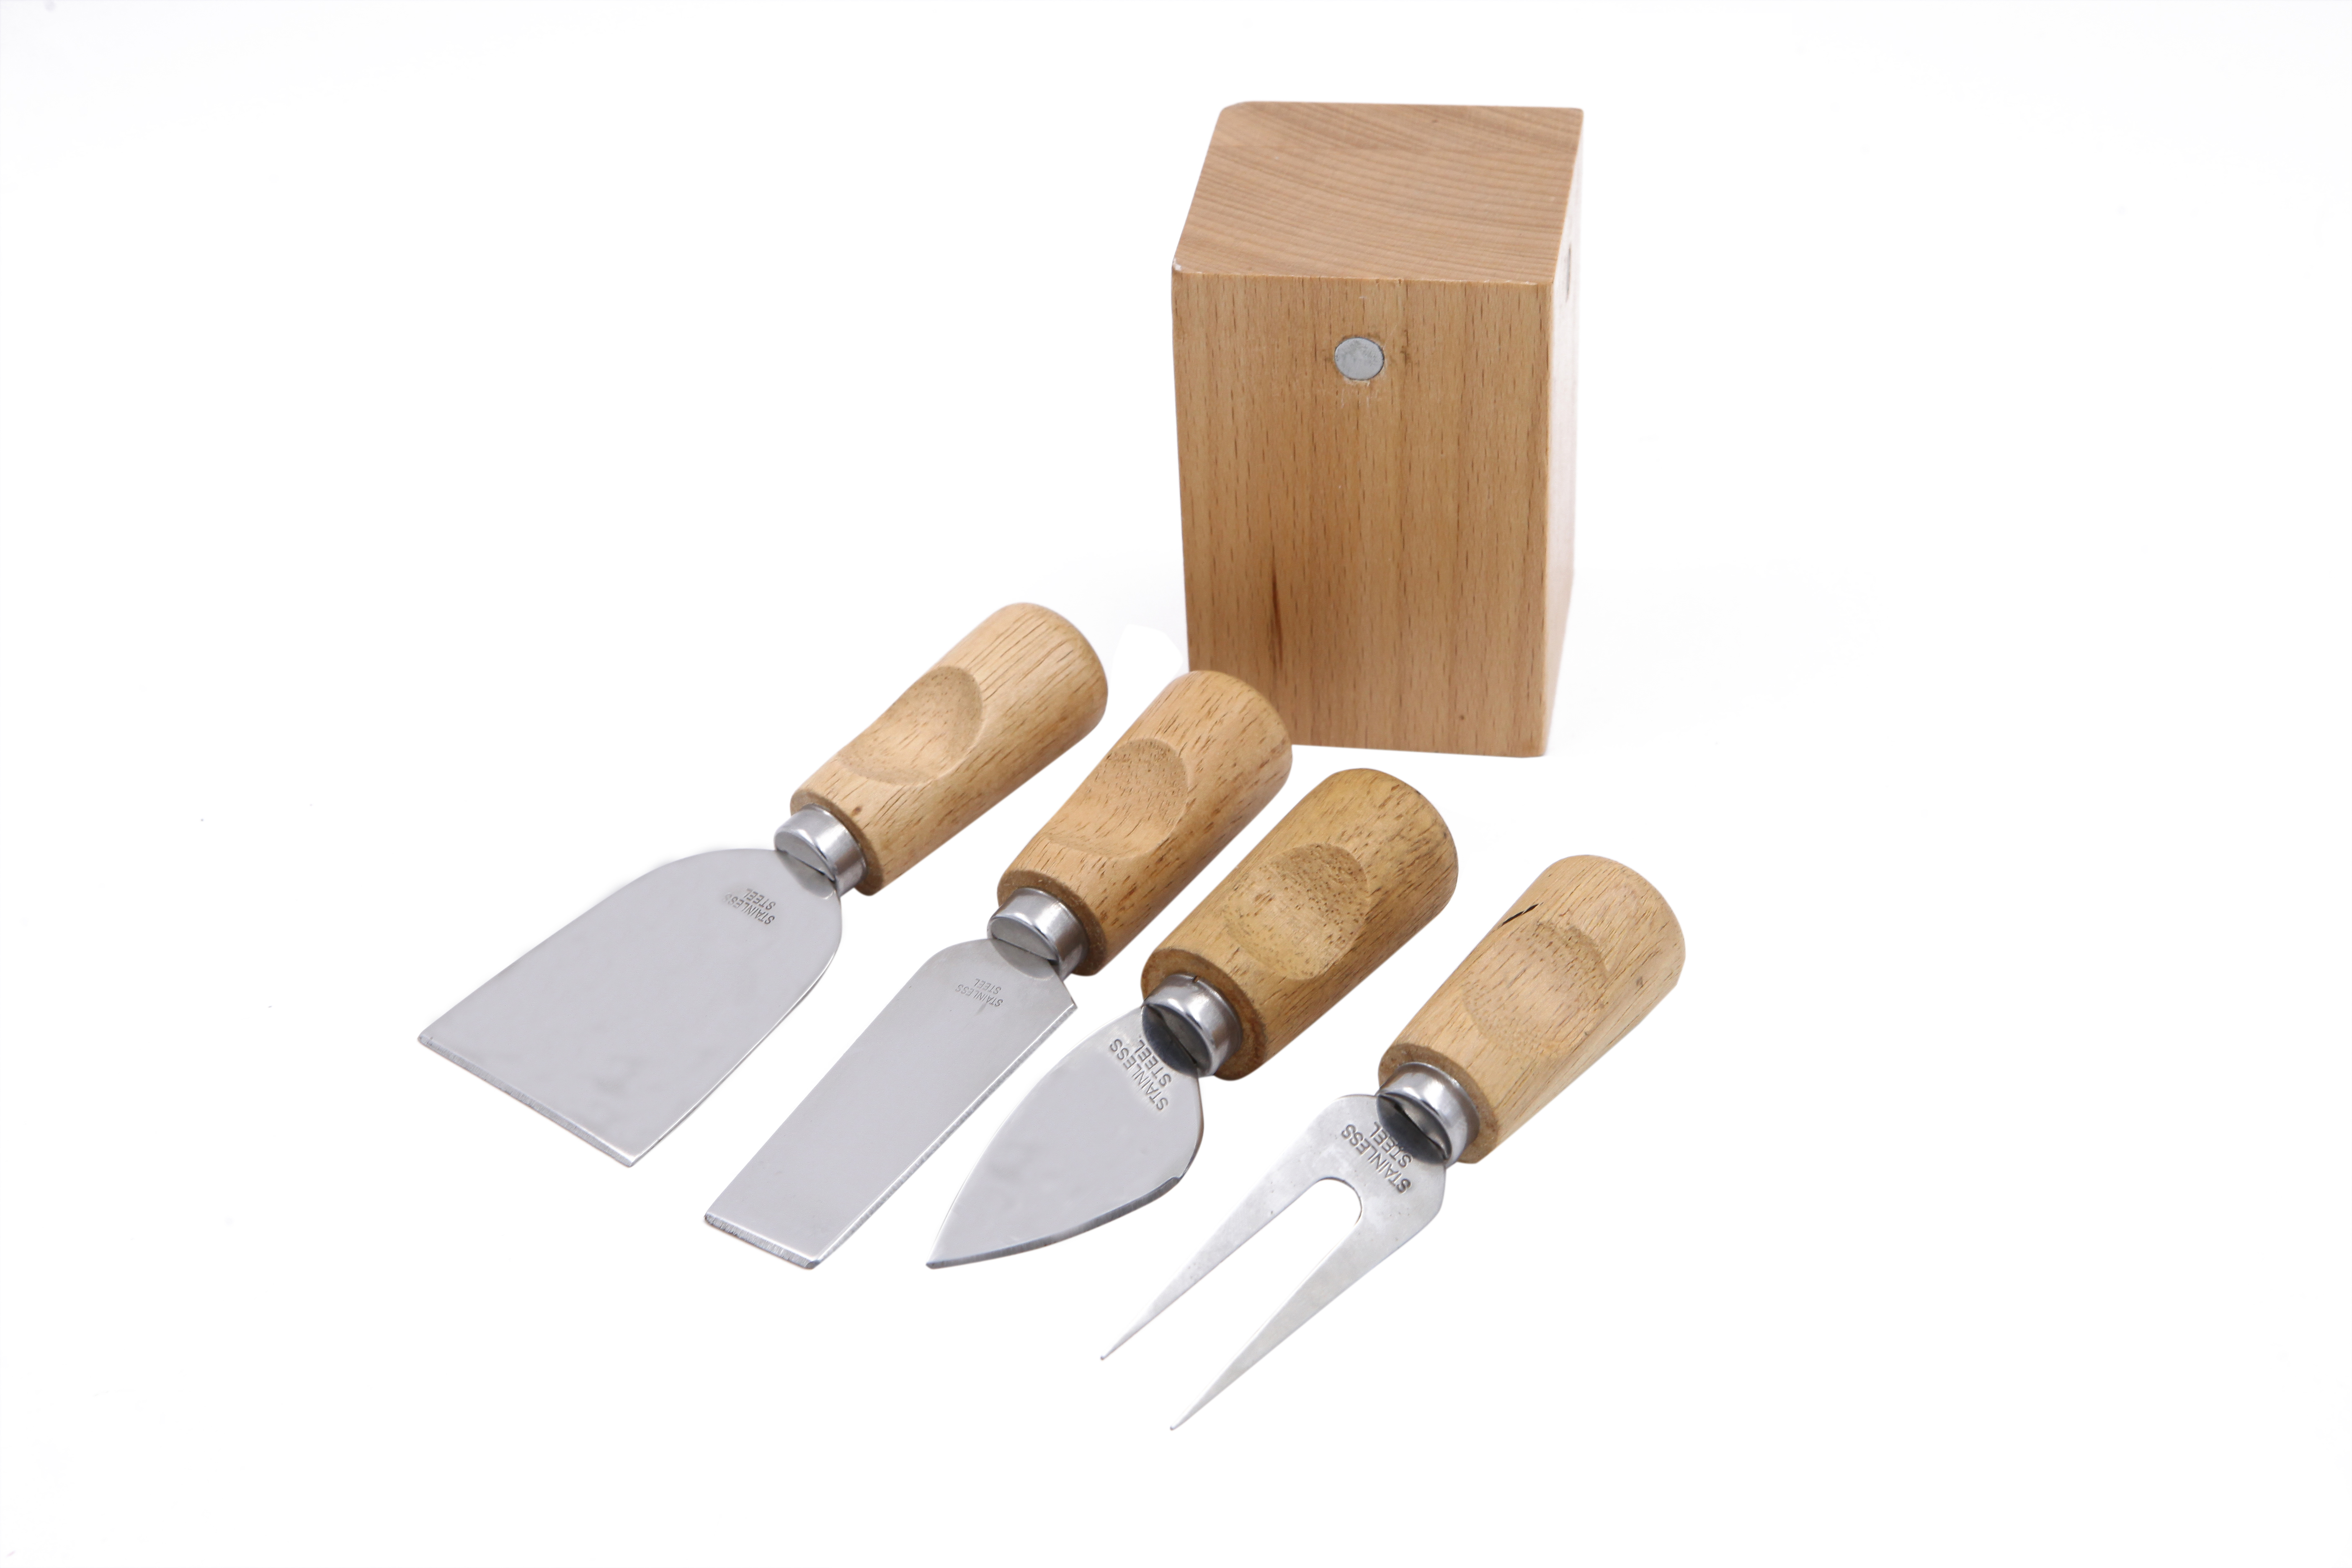 LIYING 4PCS Cheese Knives  with stand Set Bamboo Wood Handle Stainless Steel Blades Cheese Knife Slicer Kit Cooking Cutter